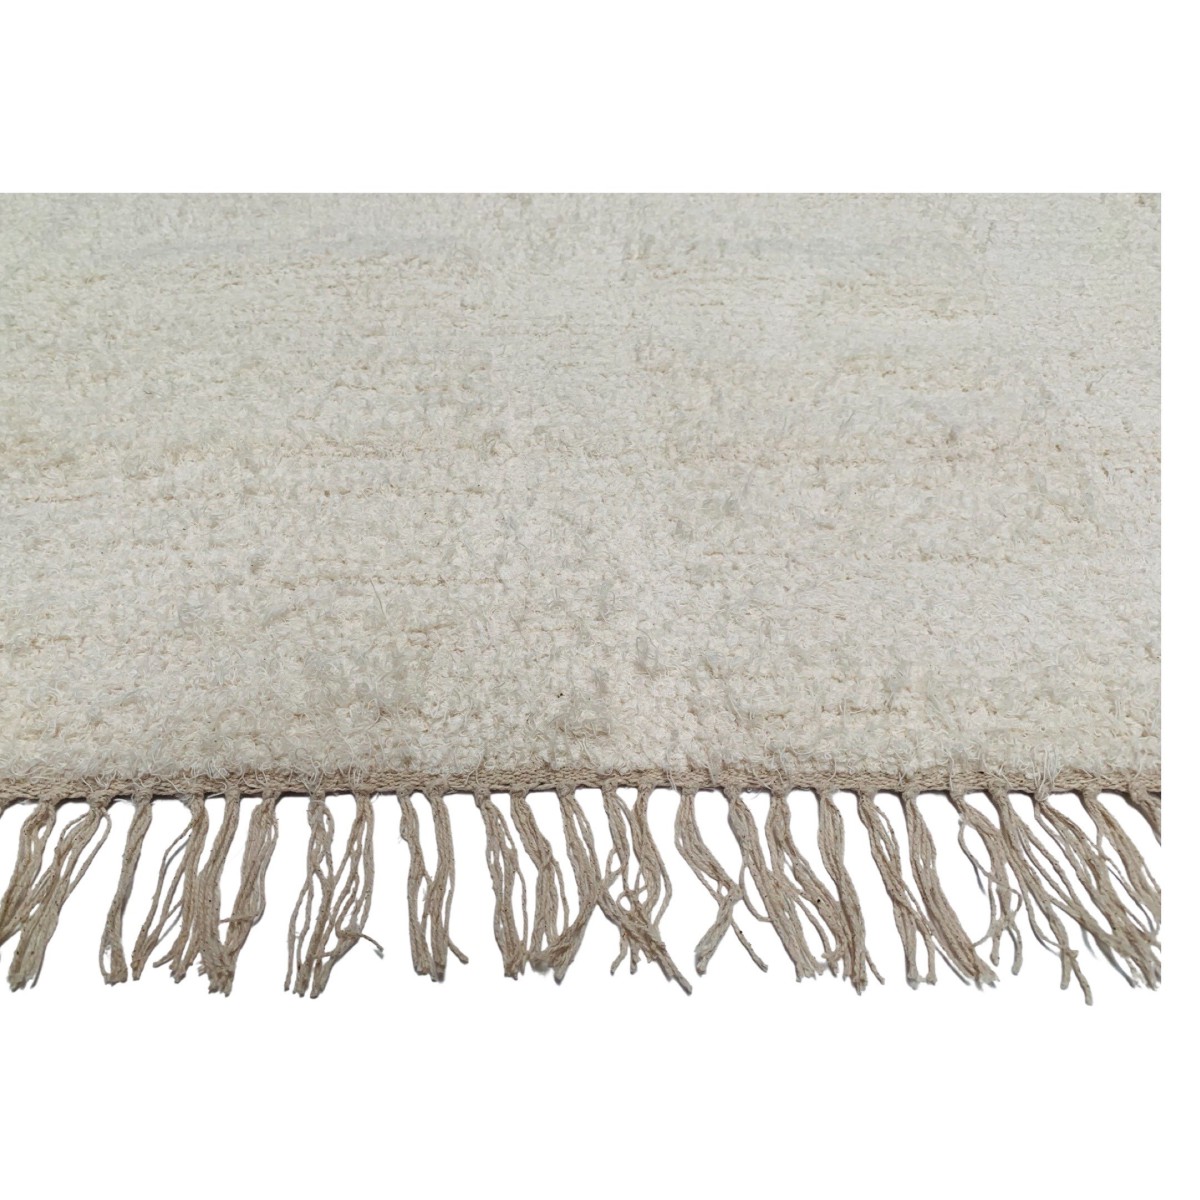 rug recycled cotton ivory 160x230cm